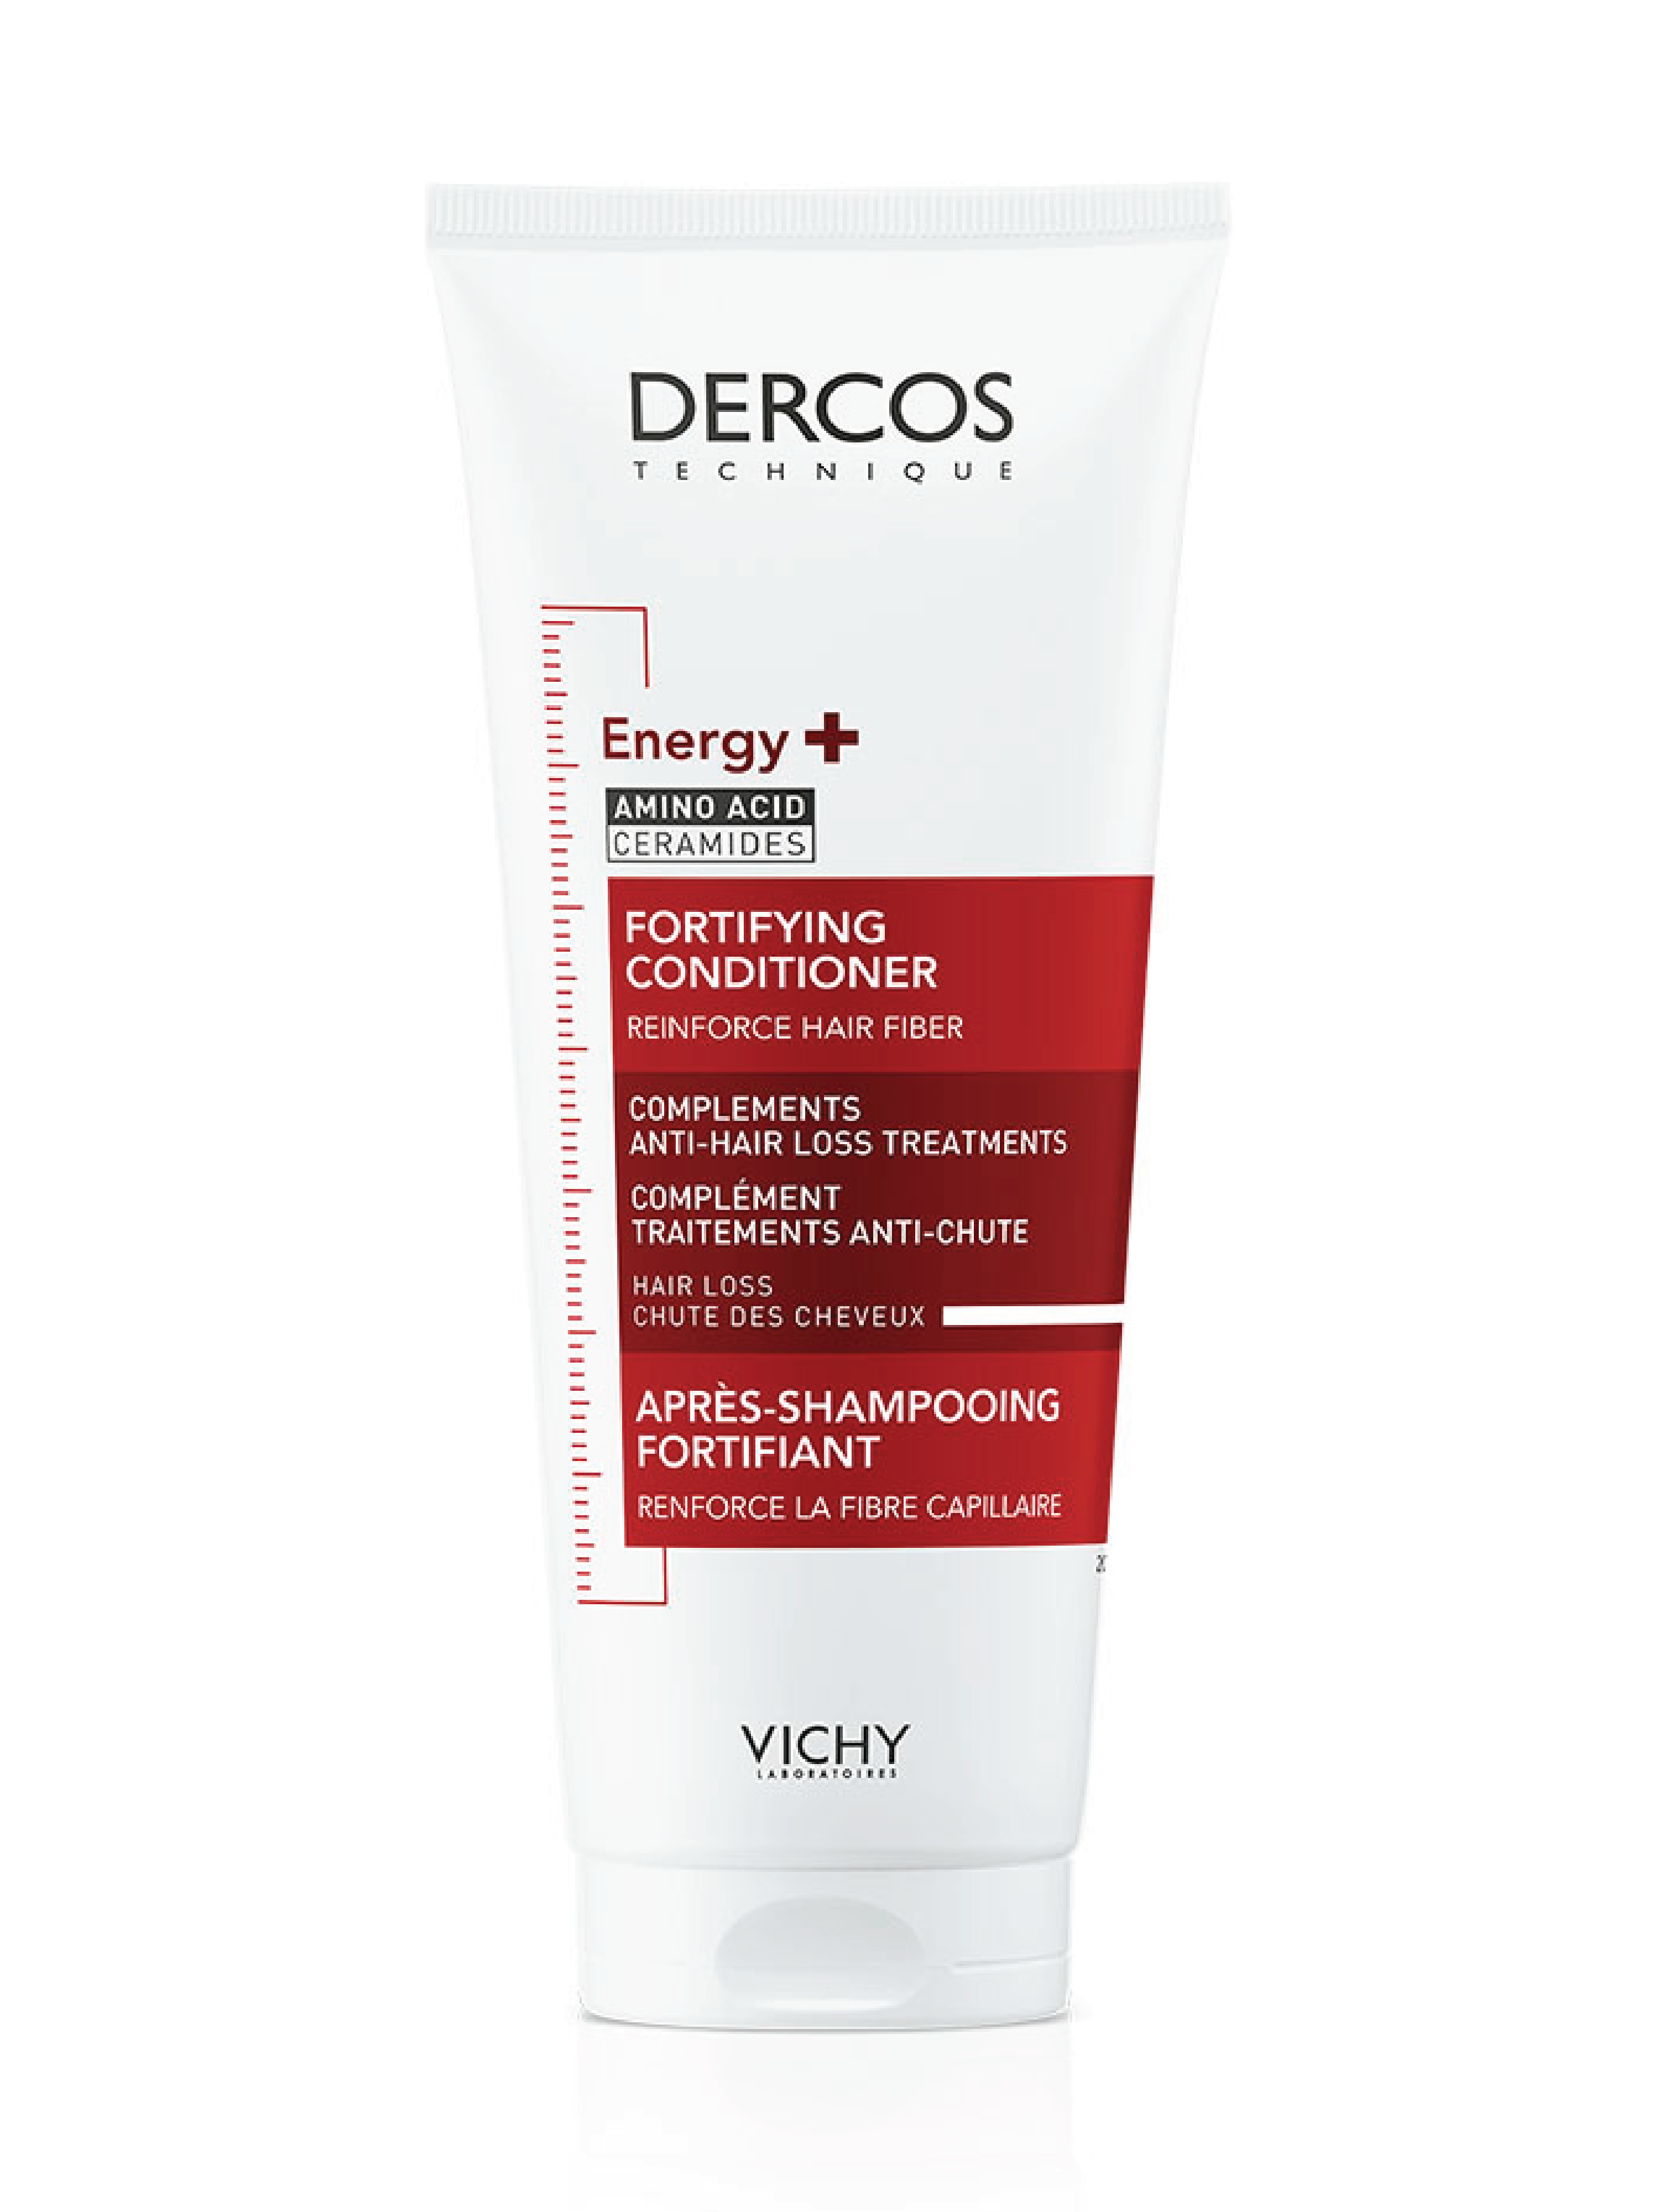 Dercos Energy+ Fortifying Conditioner, 200 ml